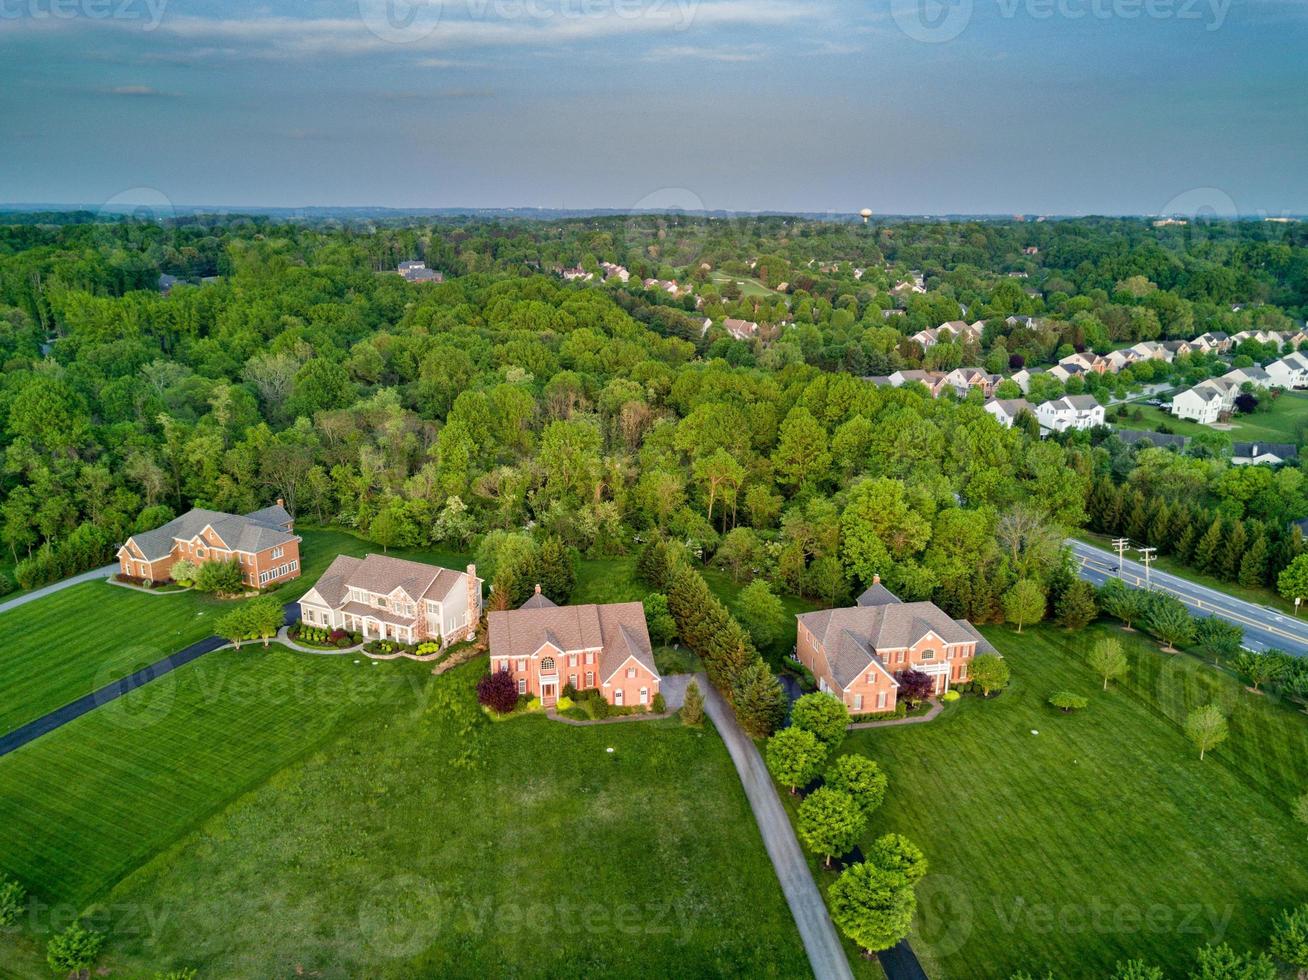 maryland county houses aerial view photo